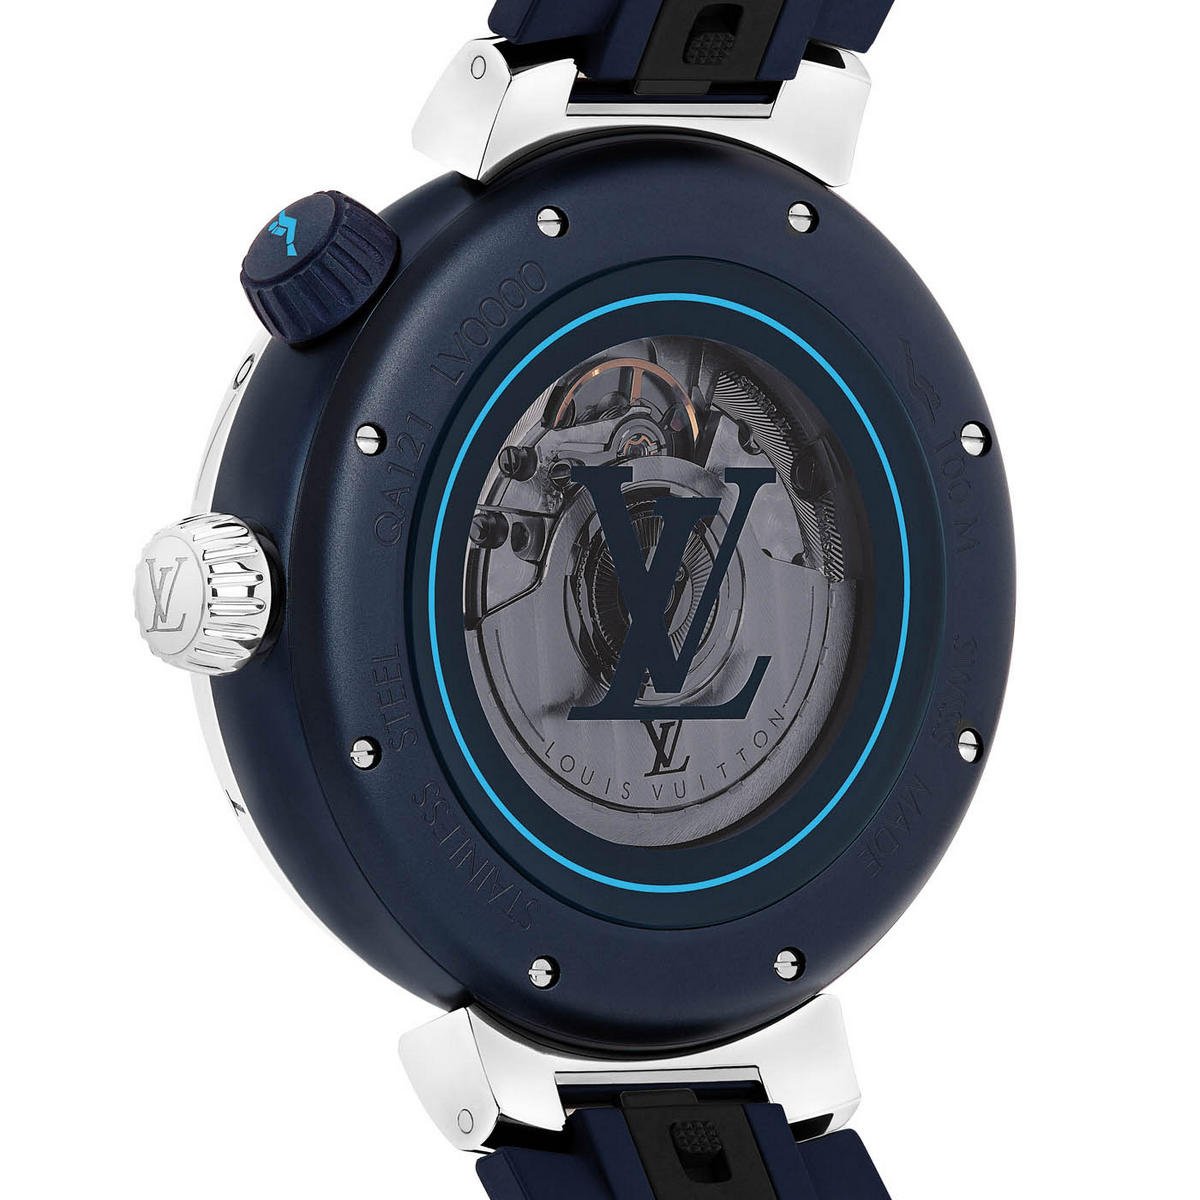 Louis Vuitton Tambour Street Diver Watch back view in blue